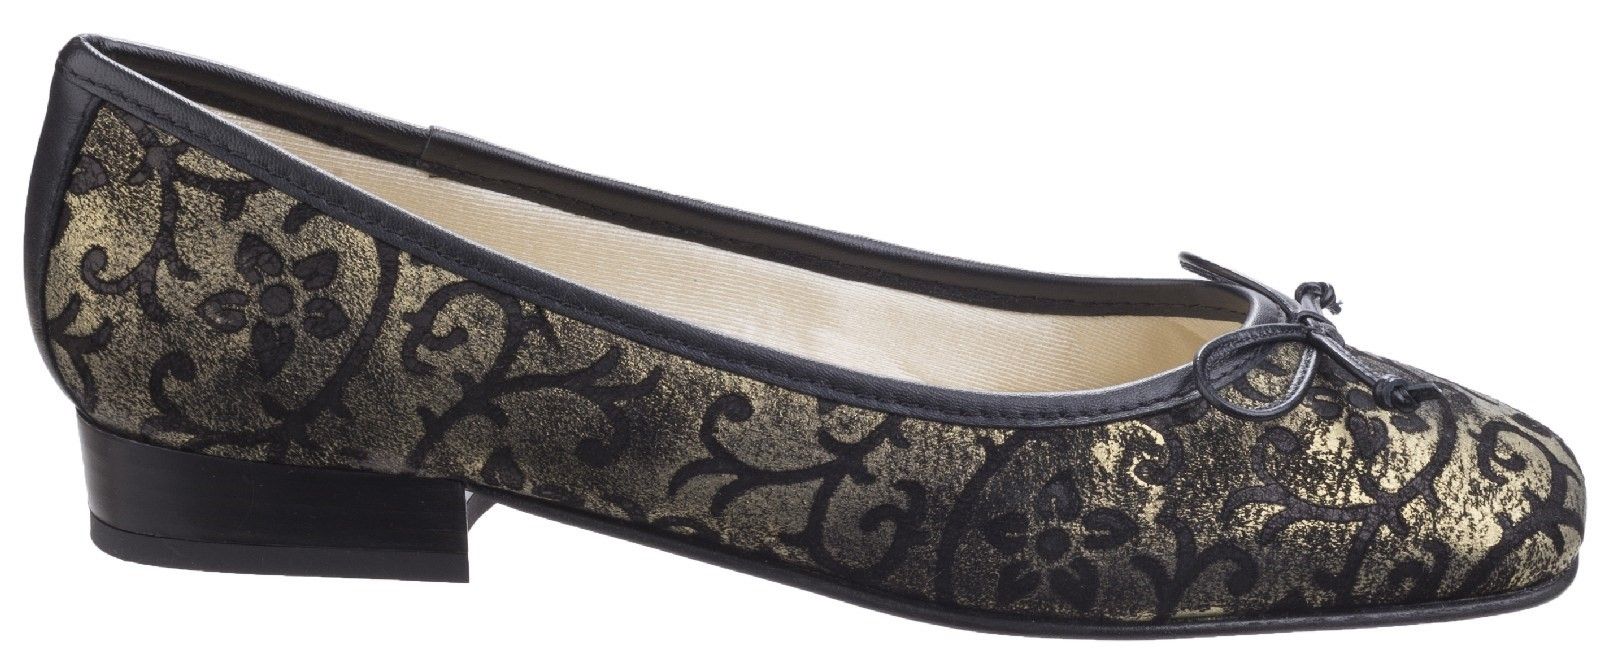 Riva brings in a twist to the traditional ballet with this regal embossed floral print court shoe.  A square toe gives a dynamic feel to your day to evening wear. Luxury metallic leather upper with embossed print. 
Gently padded soft textile lining. 
Smooth leather rim with leather bow. 
Cushioned leather footbed. 
Square front toe.